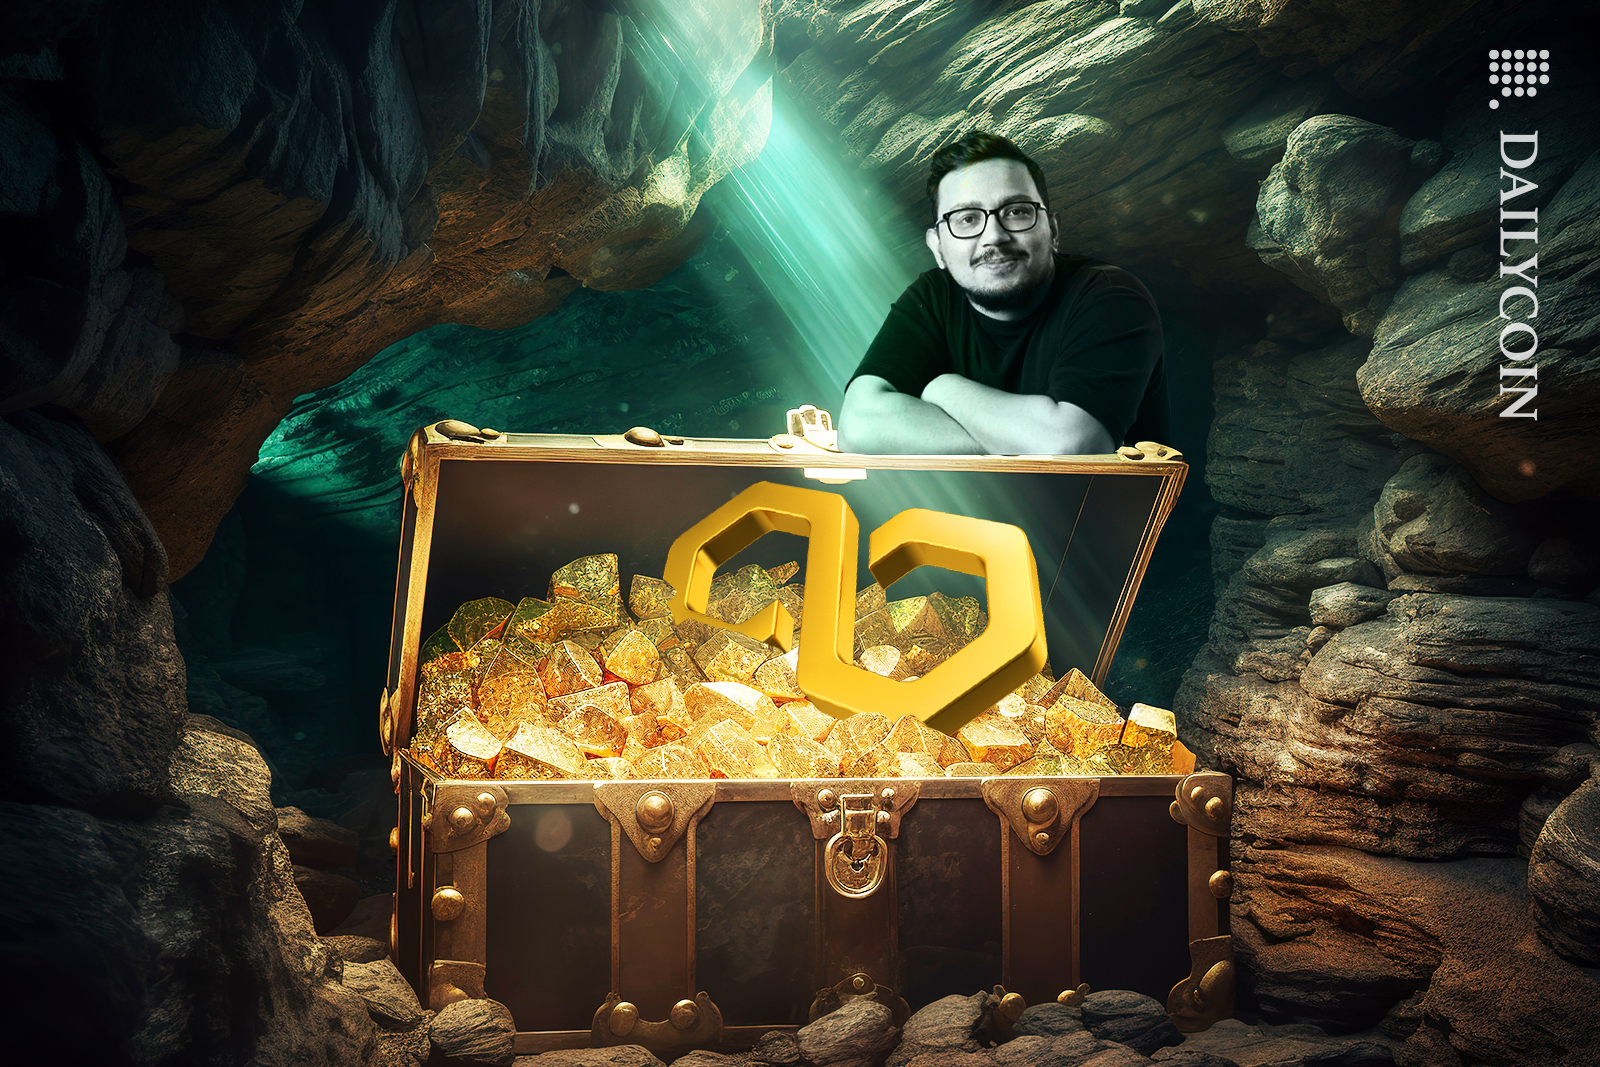 Sandeep Nailwal next to a giant treasure box that has a gold Polygon inside with little gold nuggets.